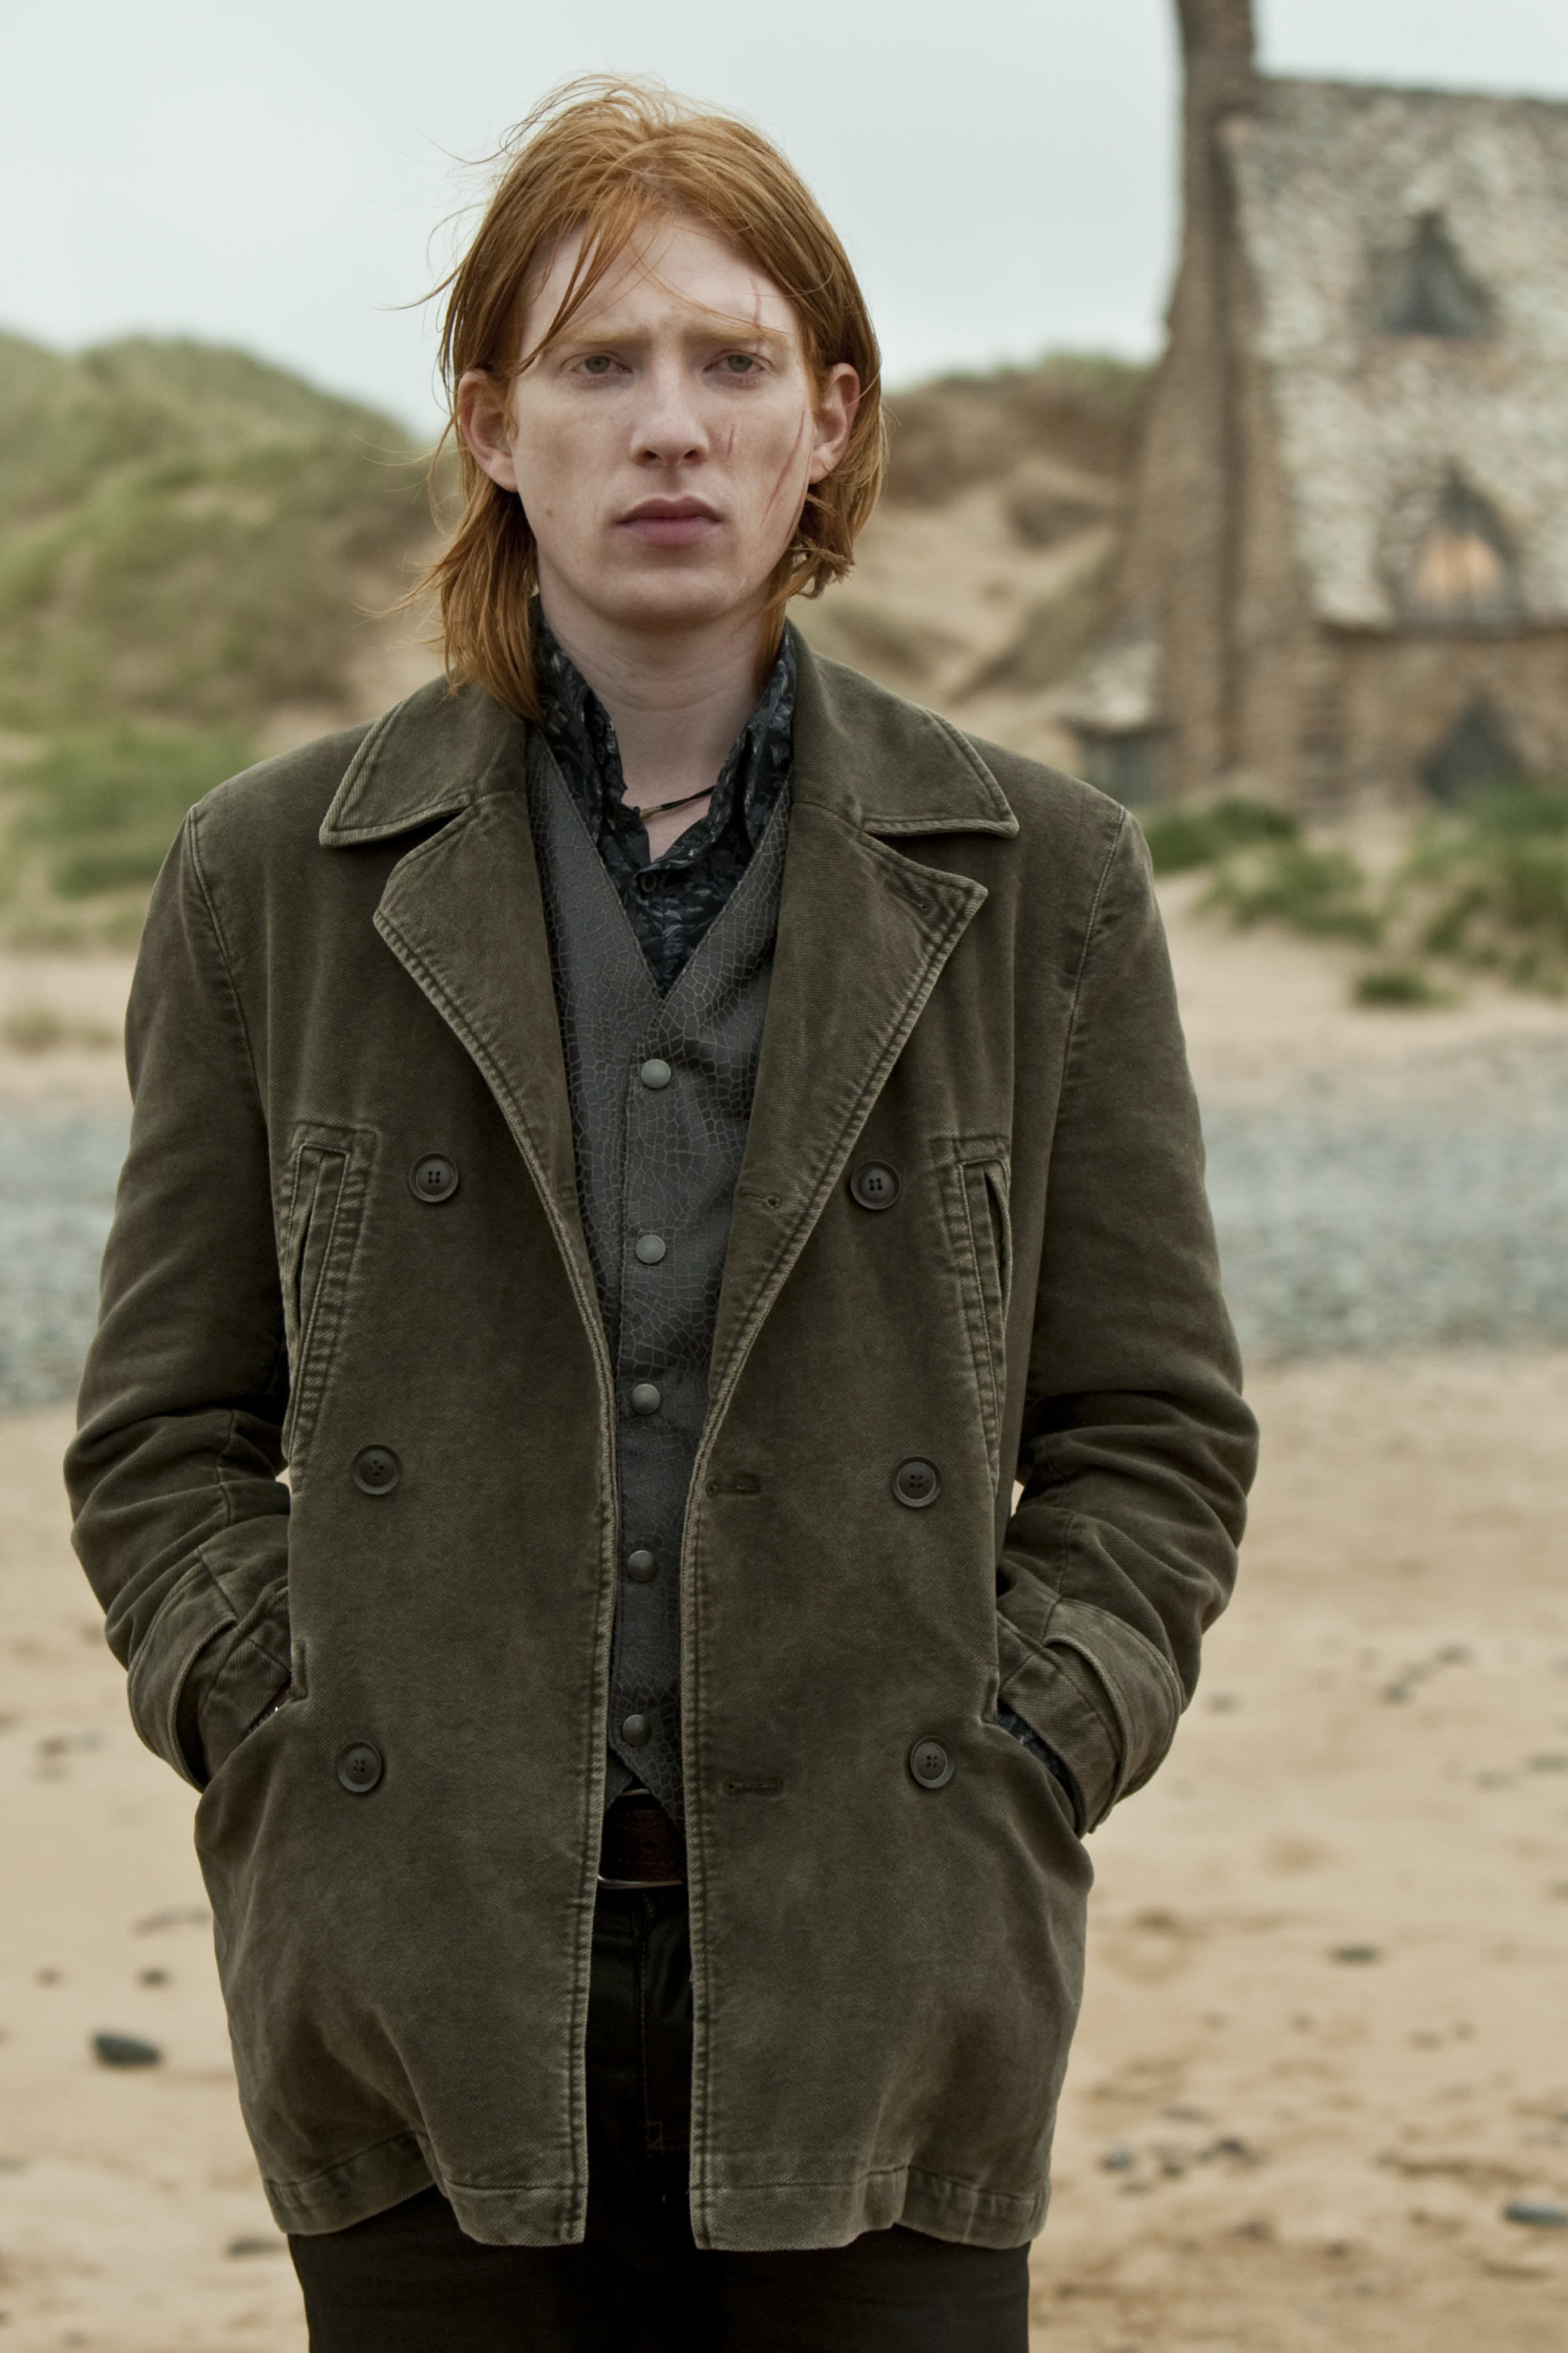 Who played Bill Weasley in the Harry Potter franchise? 2